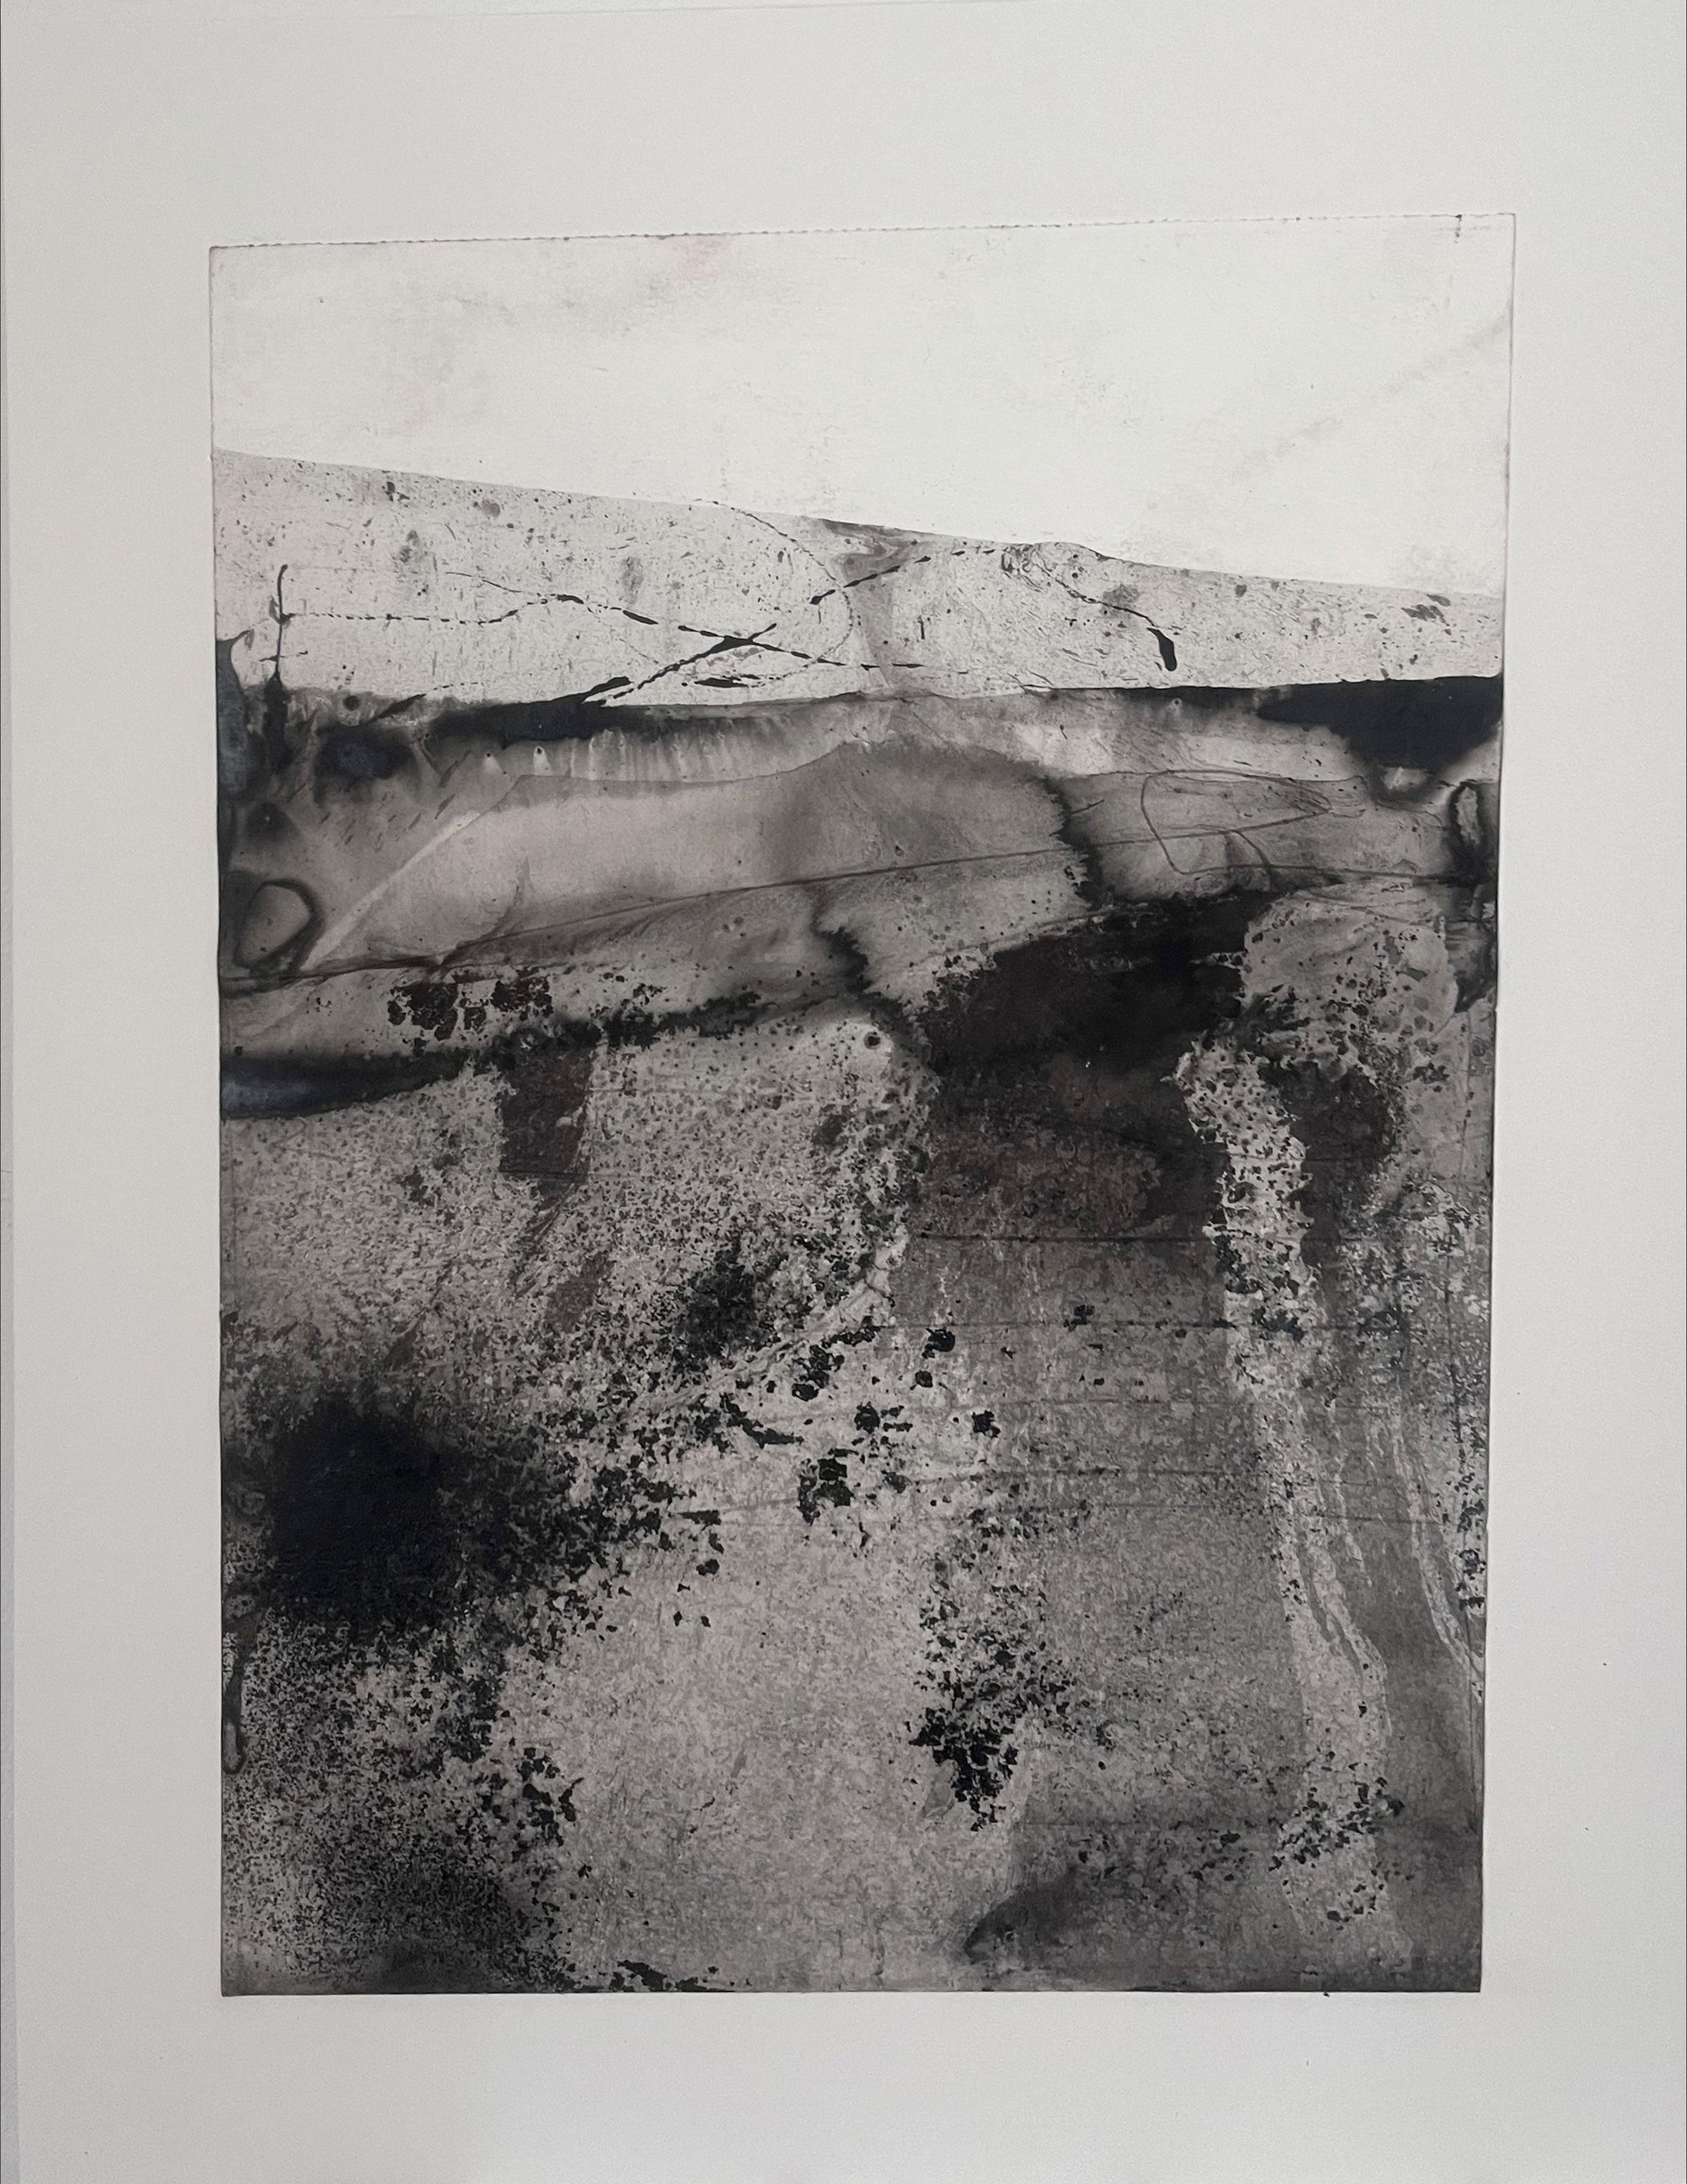 Landscape BW
charcoal on paper (Canson Paper 300gr)
30x40 cm
the Drawing is mounted on a rigid support with passepartout
dimensions 40x50 cm
Ready to Hang
Certificate of Authenticity
one of a kind



Marilina Marchica, born in 1984, was born in